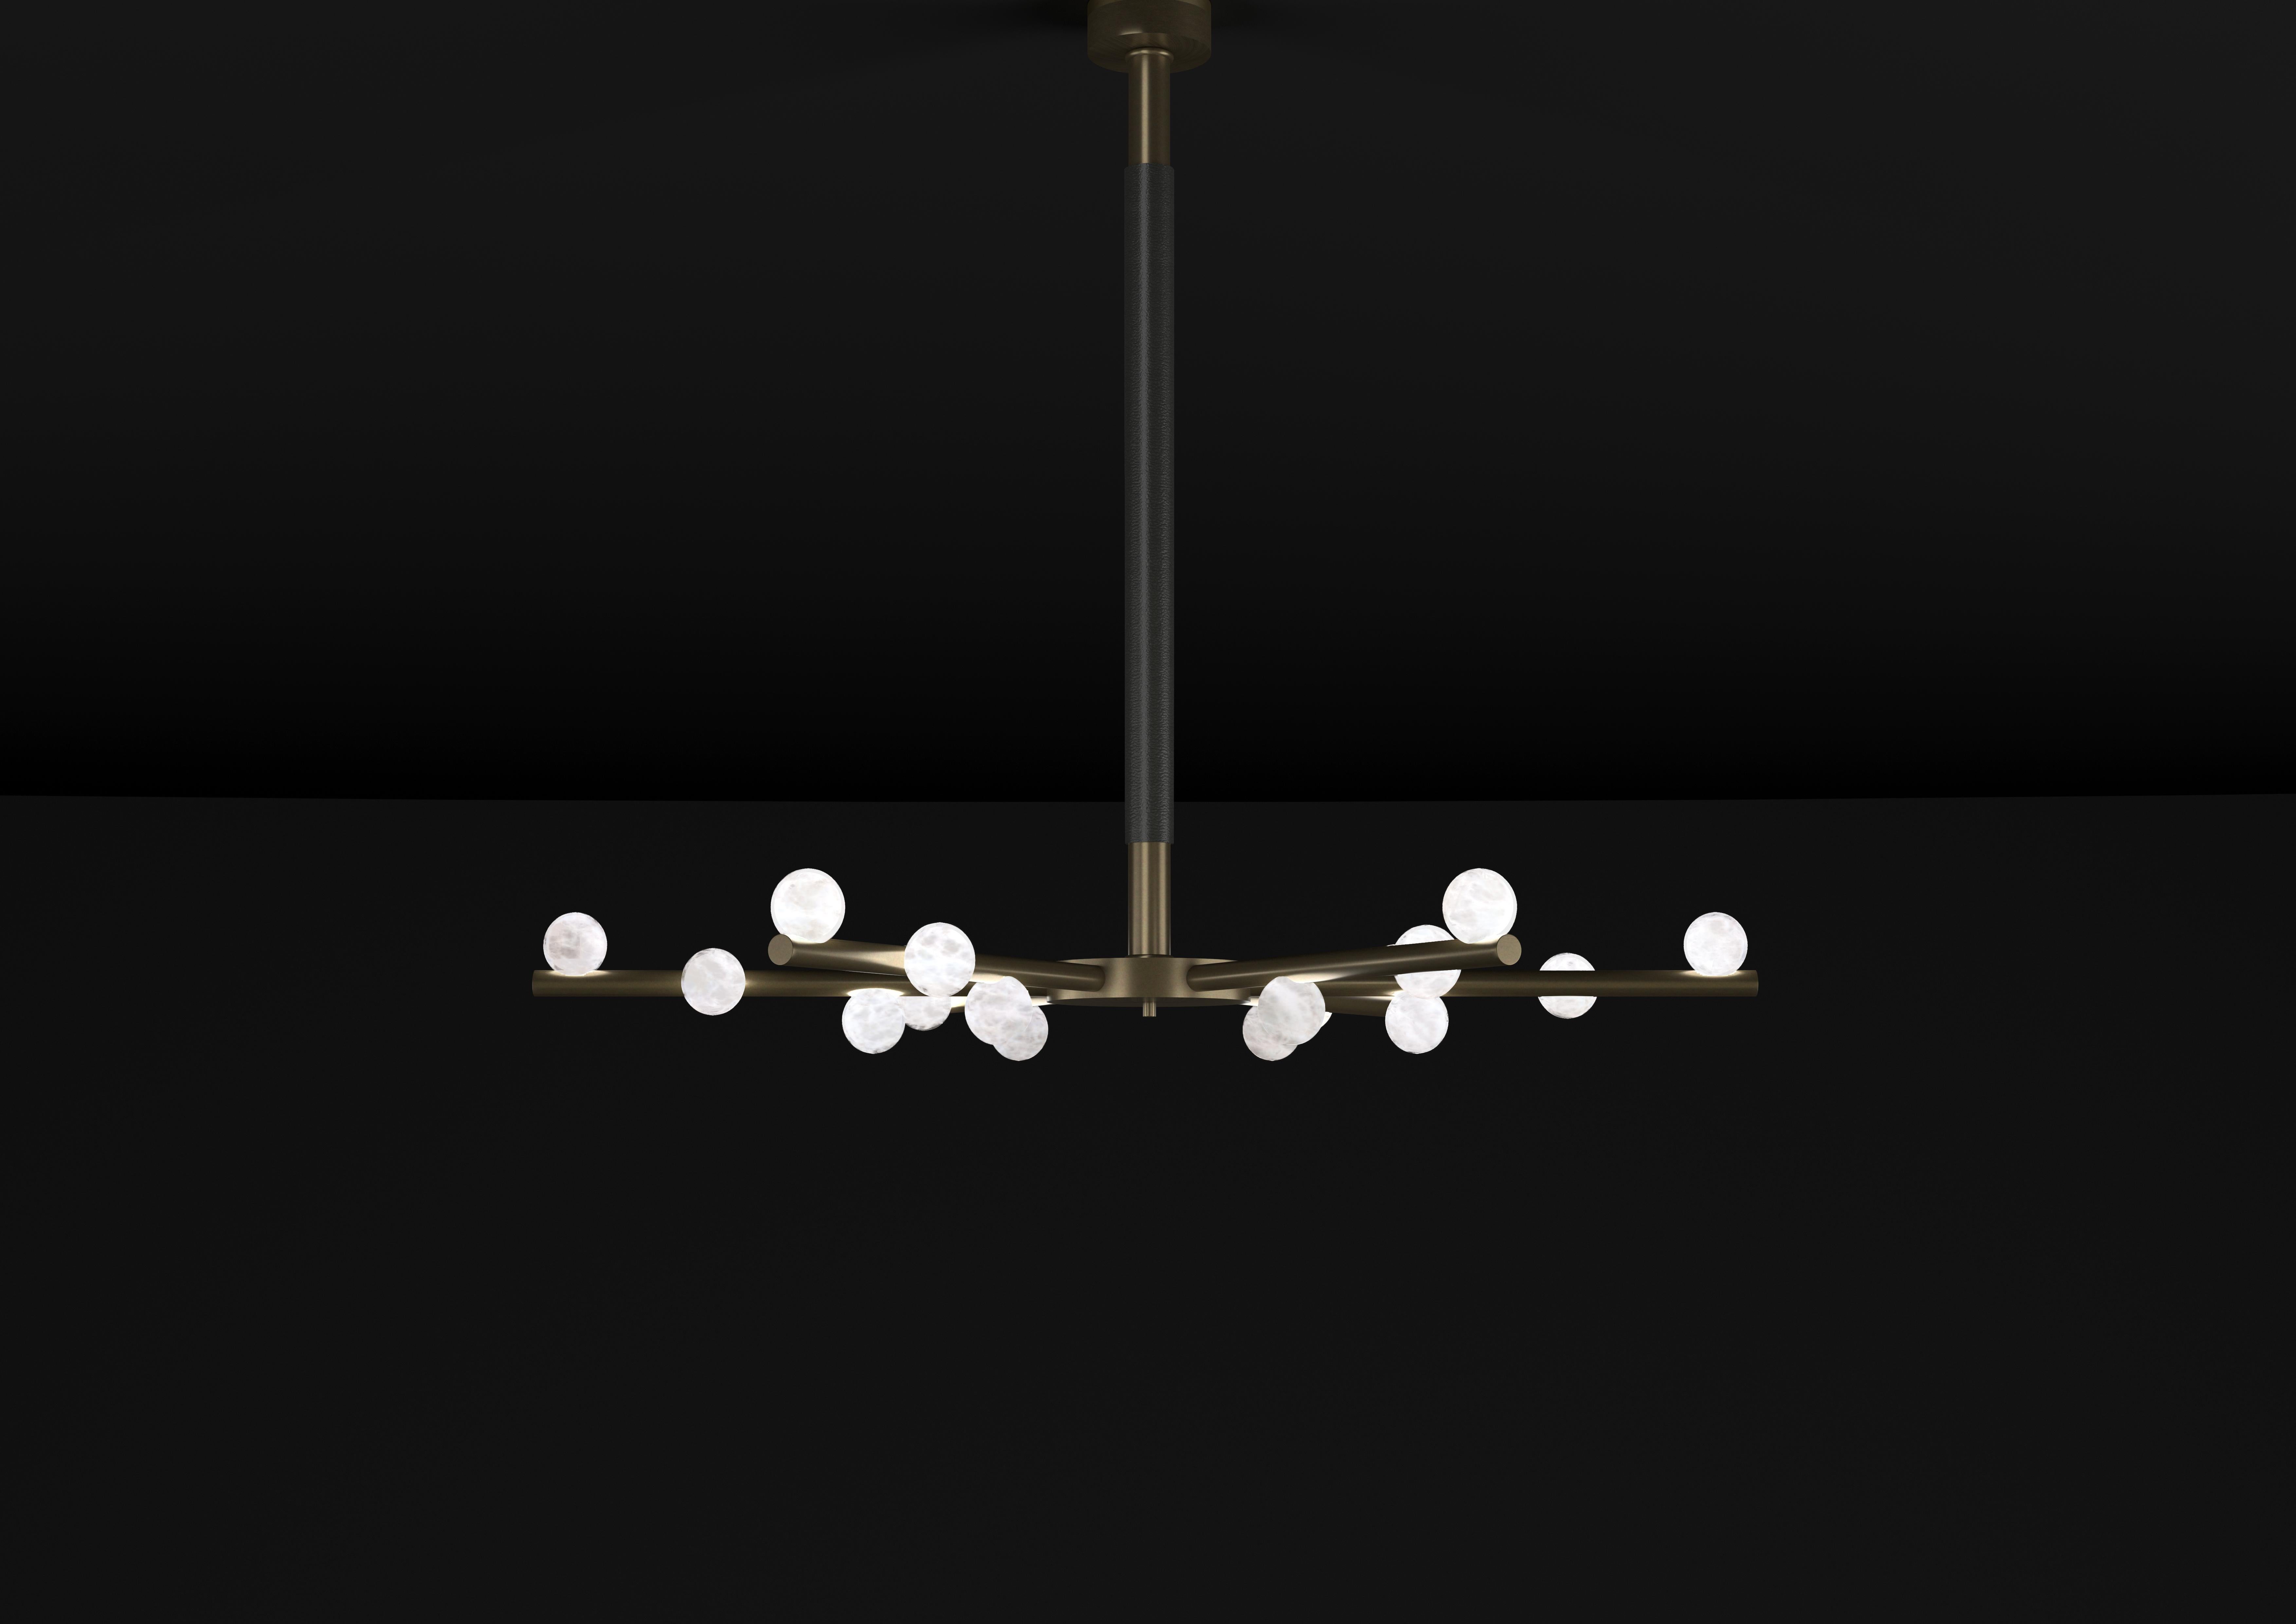 Demetra Brushed Burnished Metal Chandelier by Alabastro Italiano
Dimensions: D 85 x W 97 x H 85 cm.
Materials: White alabaster, brushed burnished metal and leather.

Available in different finishes: Shiny Silver, Bronze, Brushed Brass, Ruggine of